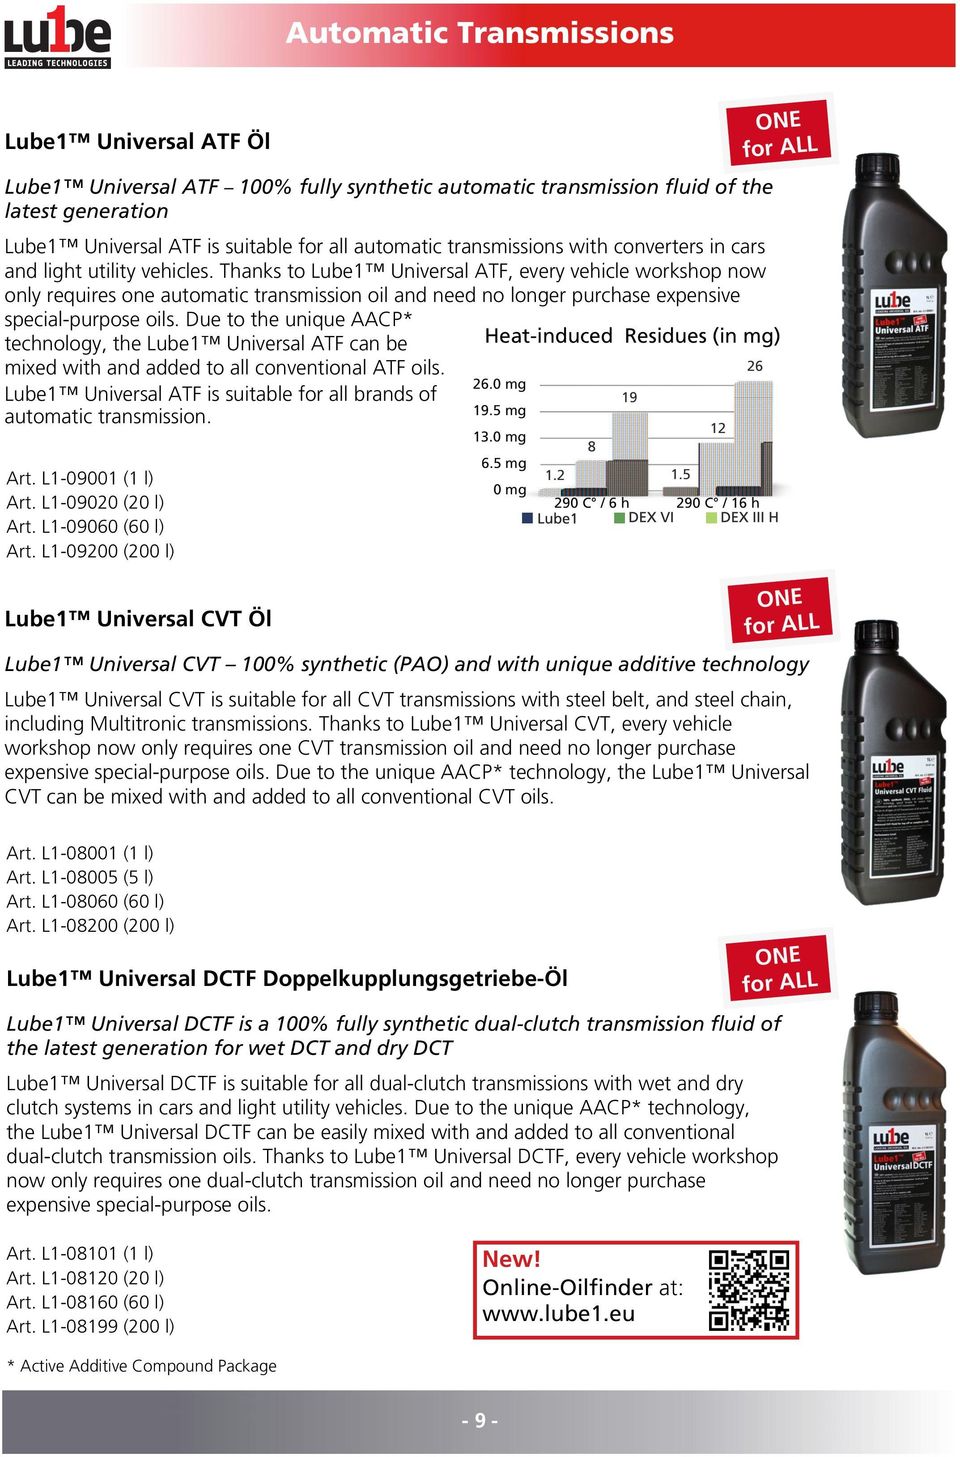 Thanks to Lube1 Universal ATF, every vehicle workshop now only requires one automatic transmission oil and need no longer purchase expensive special-purpose oils.